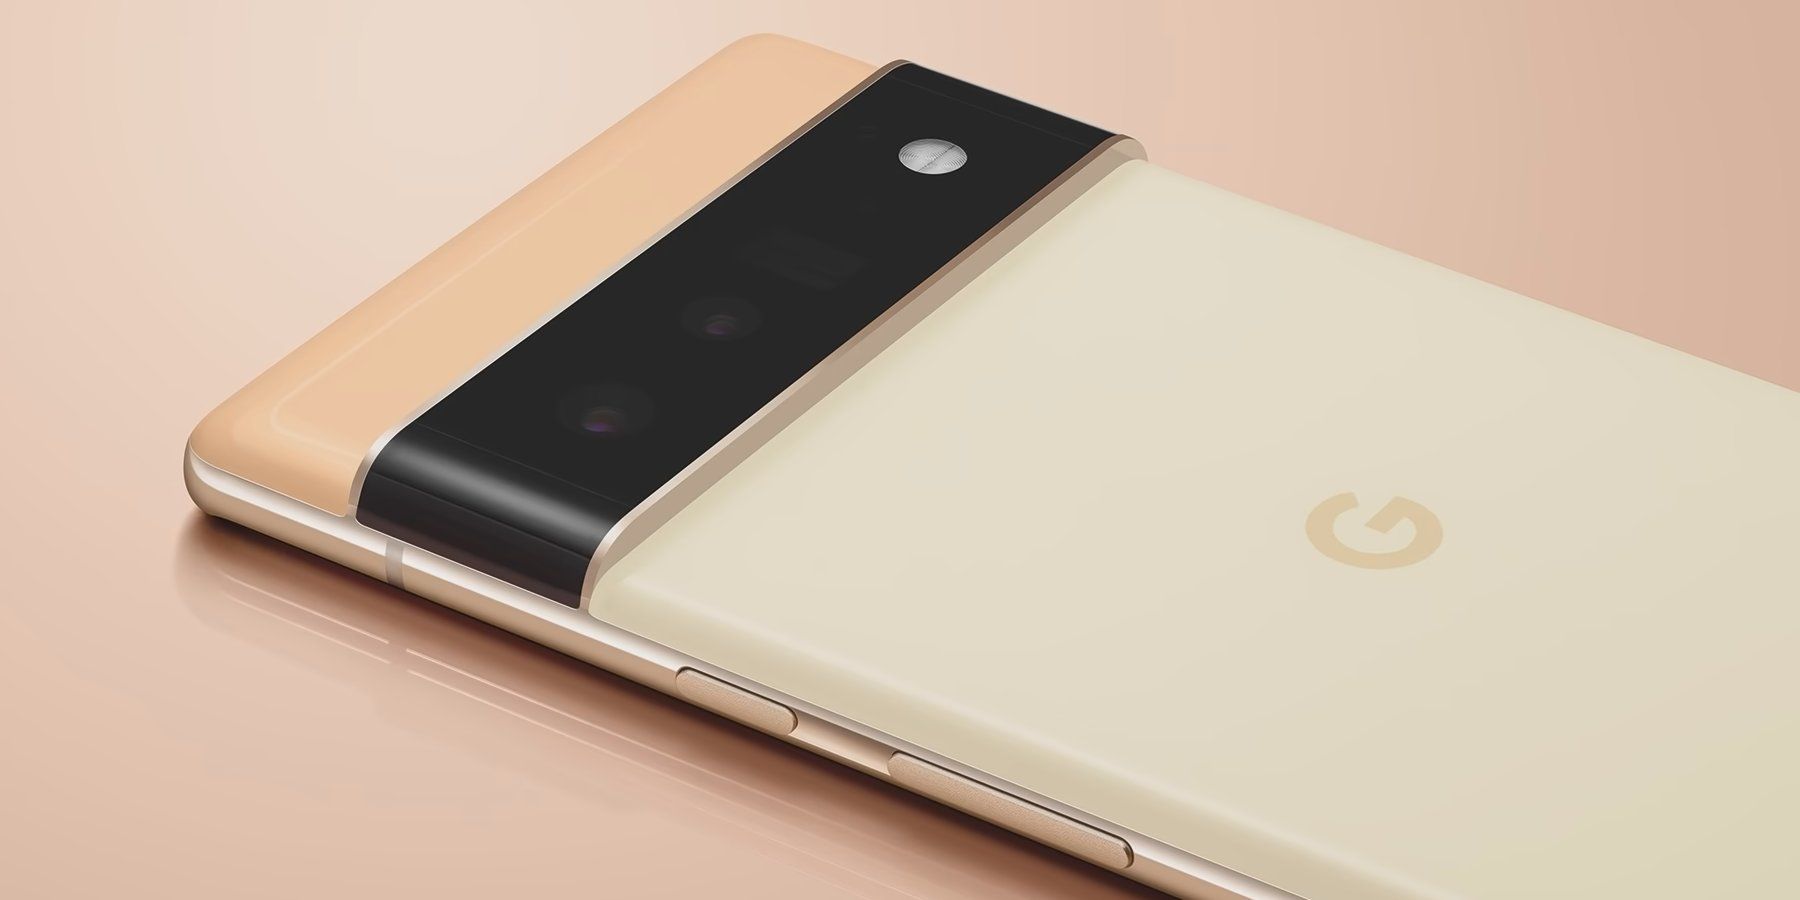 The Pixel 6 Camera Looks Absolutely Massive In These Renders